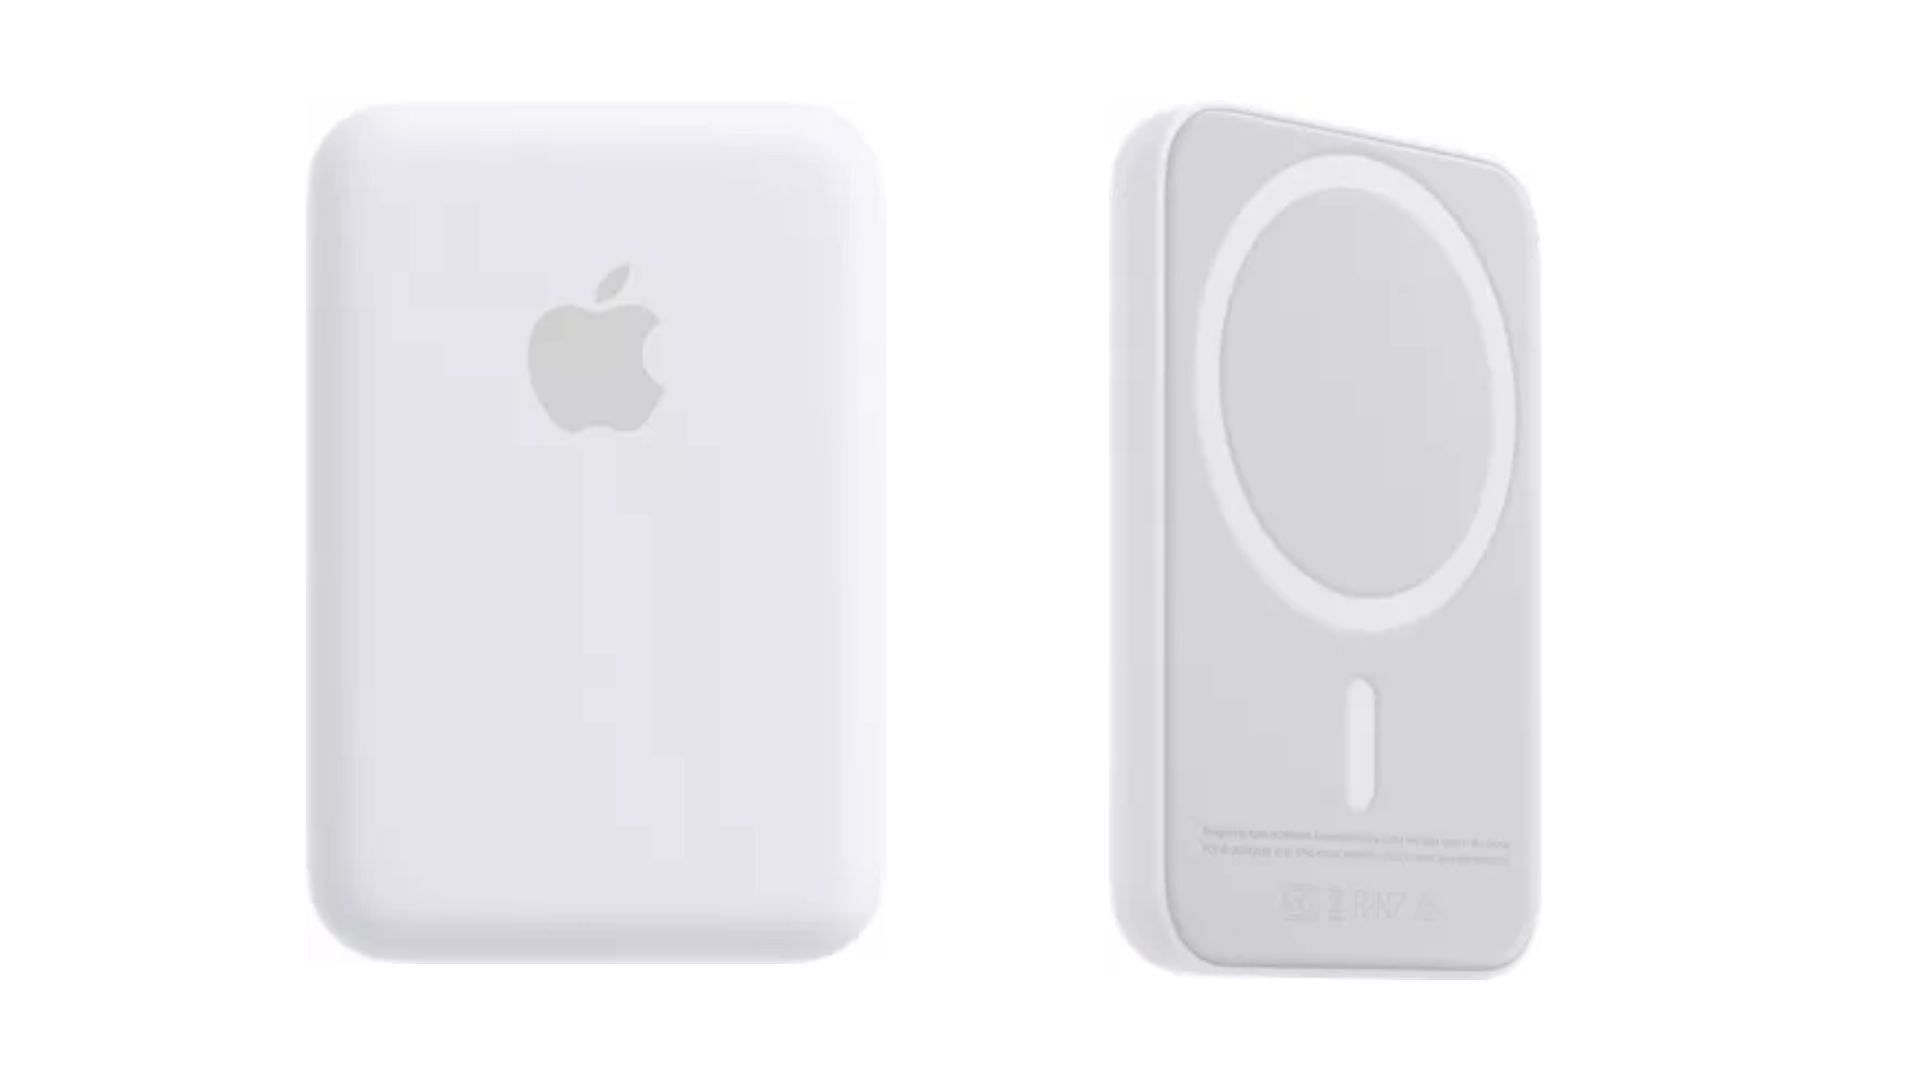 The Apple MagSafe Battery Pack (image via Apple)